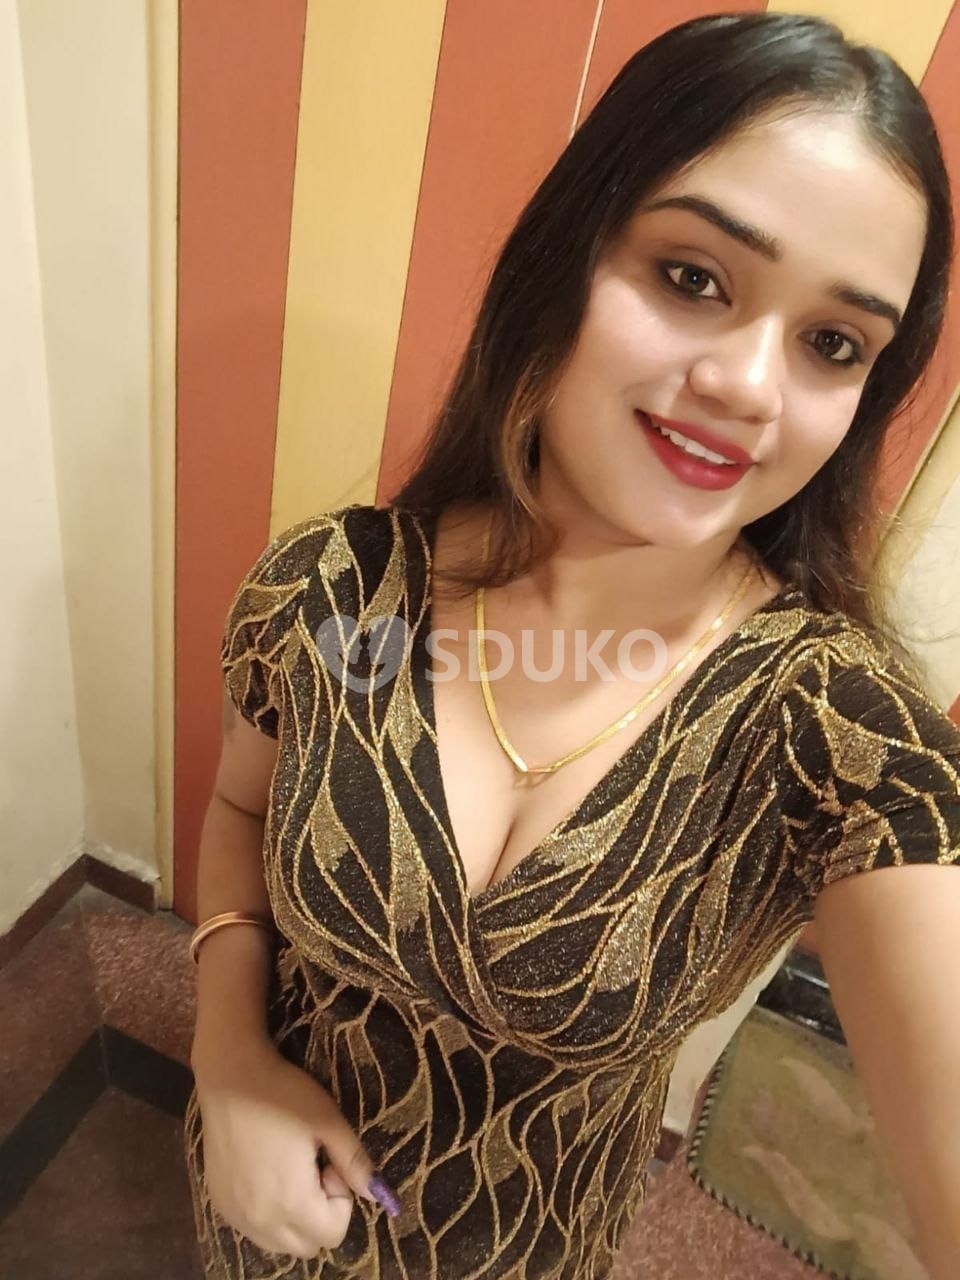 Hamirpur 💯Myself Payal call girl service hotel and home service 24 hours available now call me